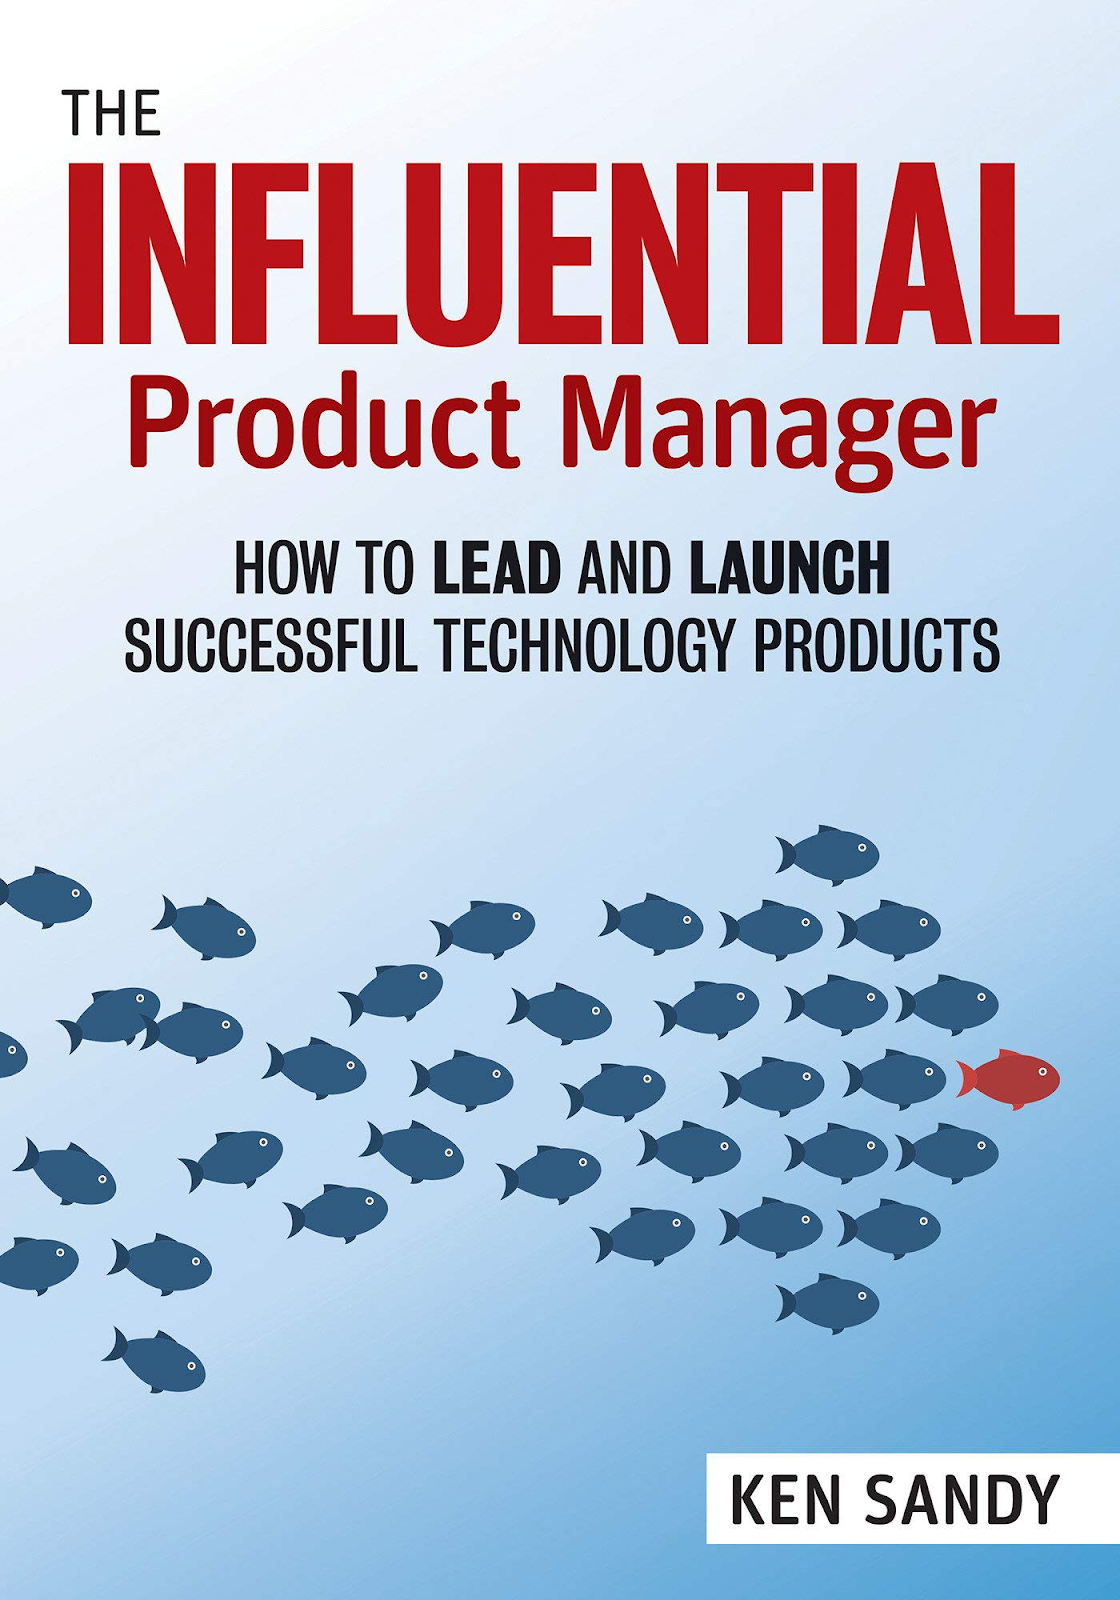  The Influential Product Manager - product management books